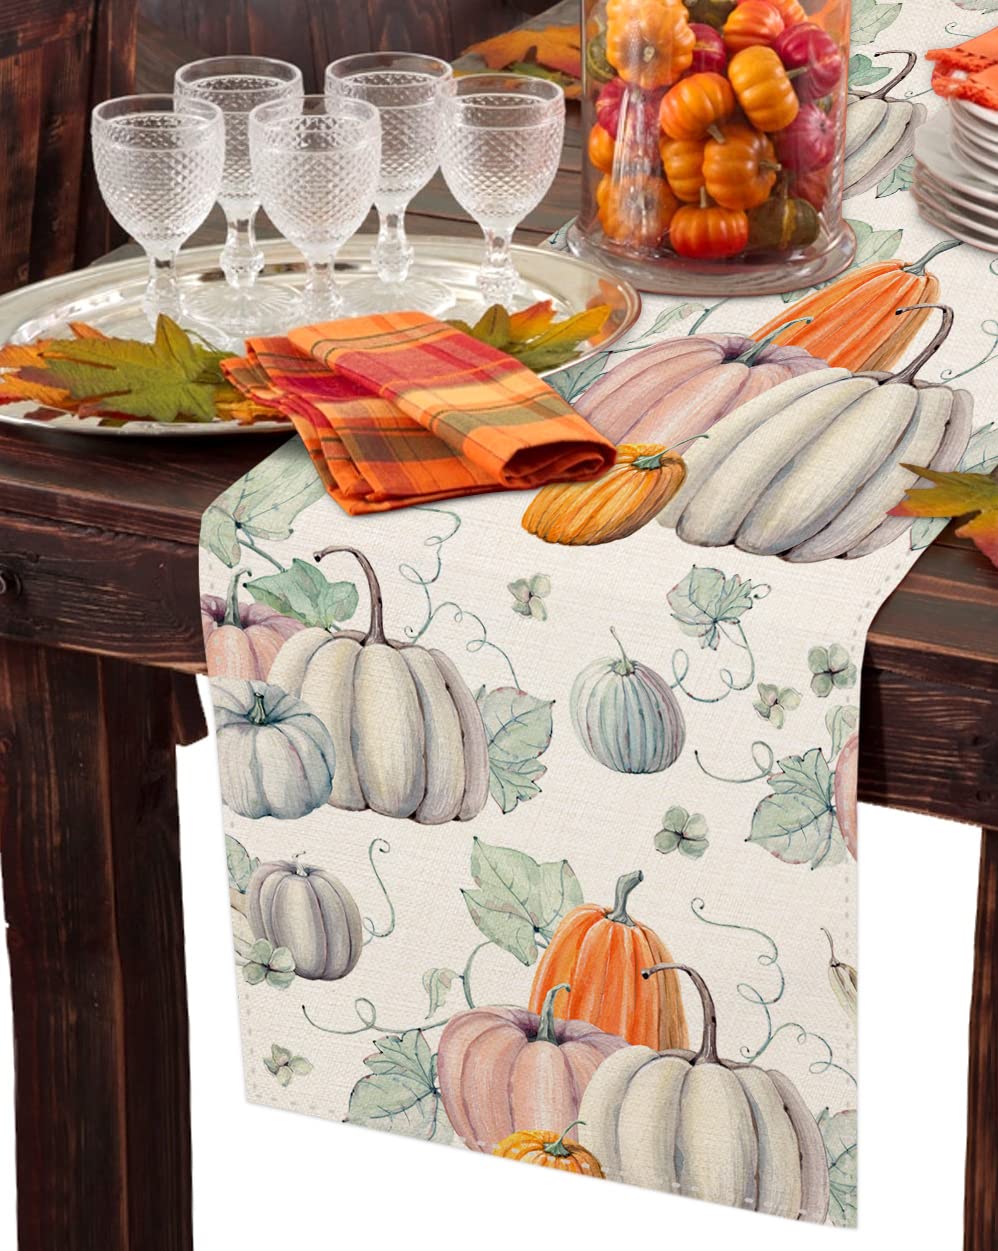 Sambosk Fall Gray Pumpkin Table Runner, Autumn Thanksgiving Table Runners for Kitchen Dining Coffee or Indoor and Outdoor Home Parties Decor 13 x 72 Inches SK075